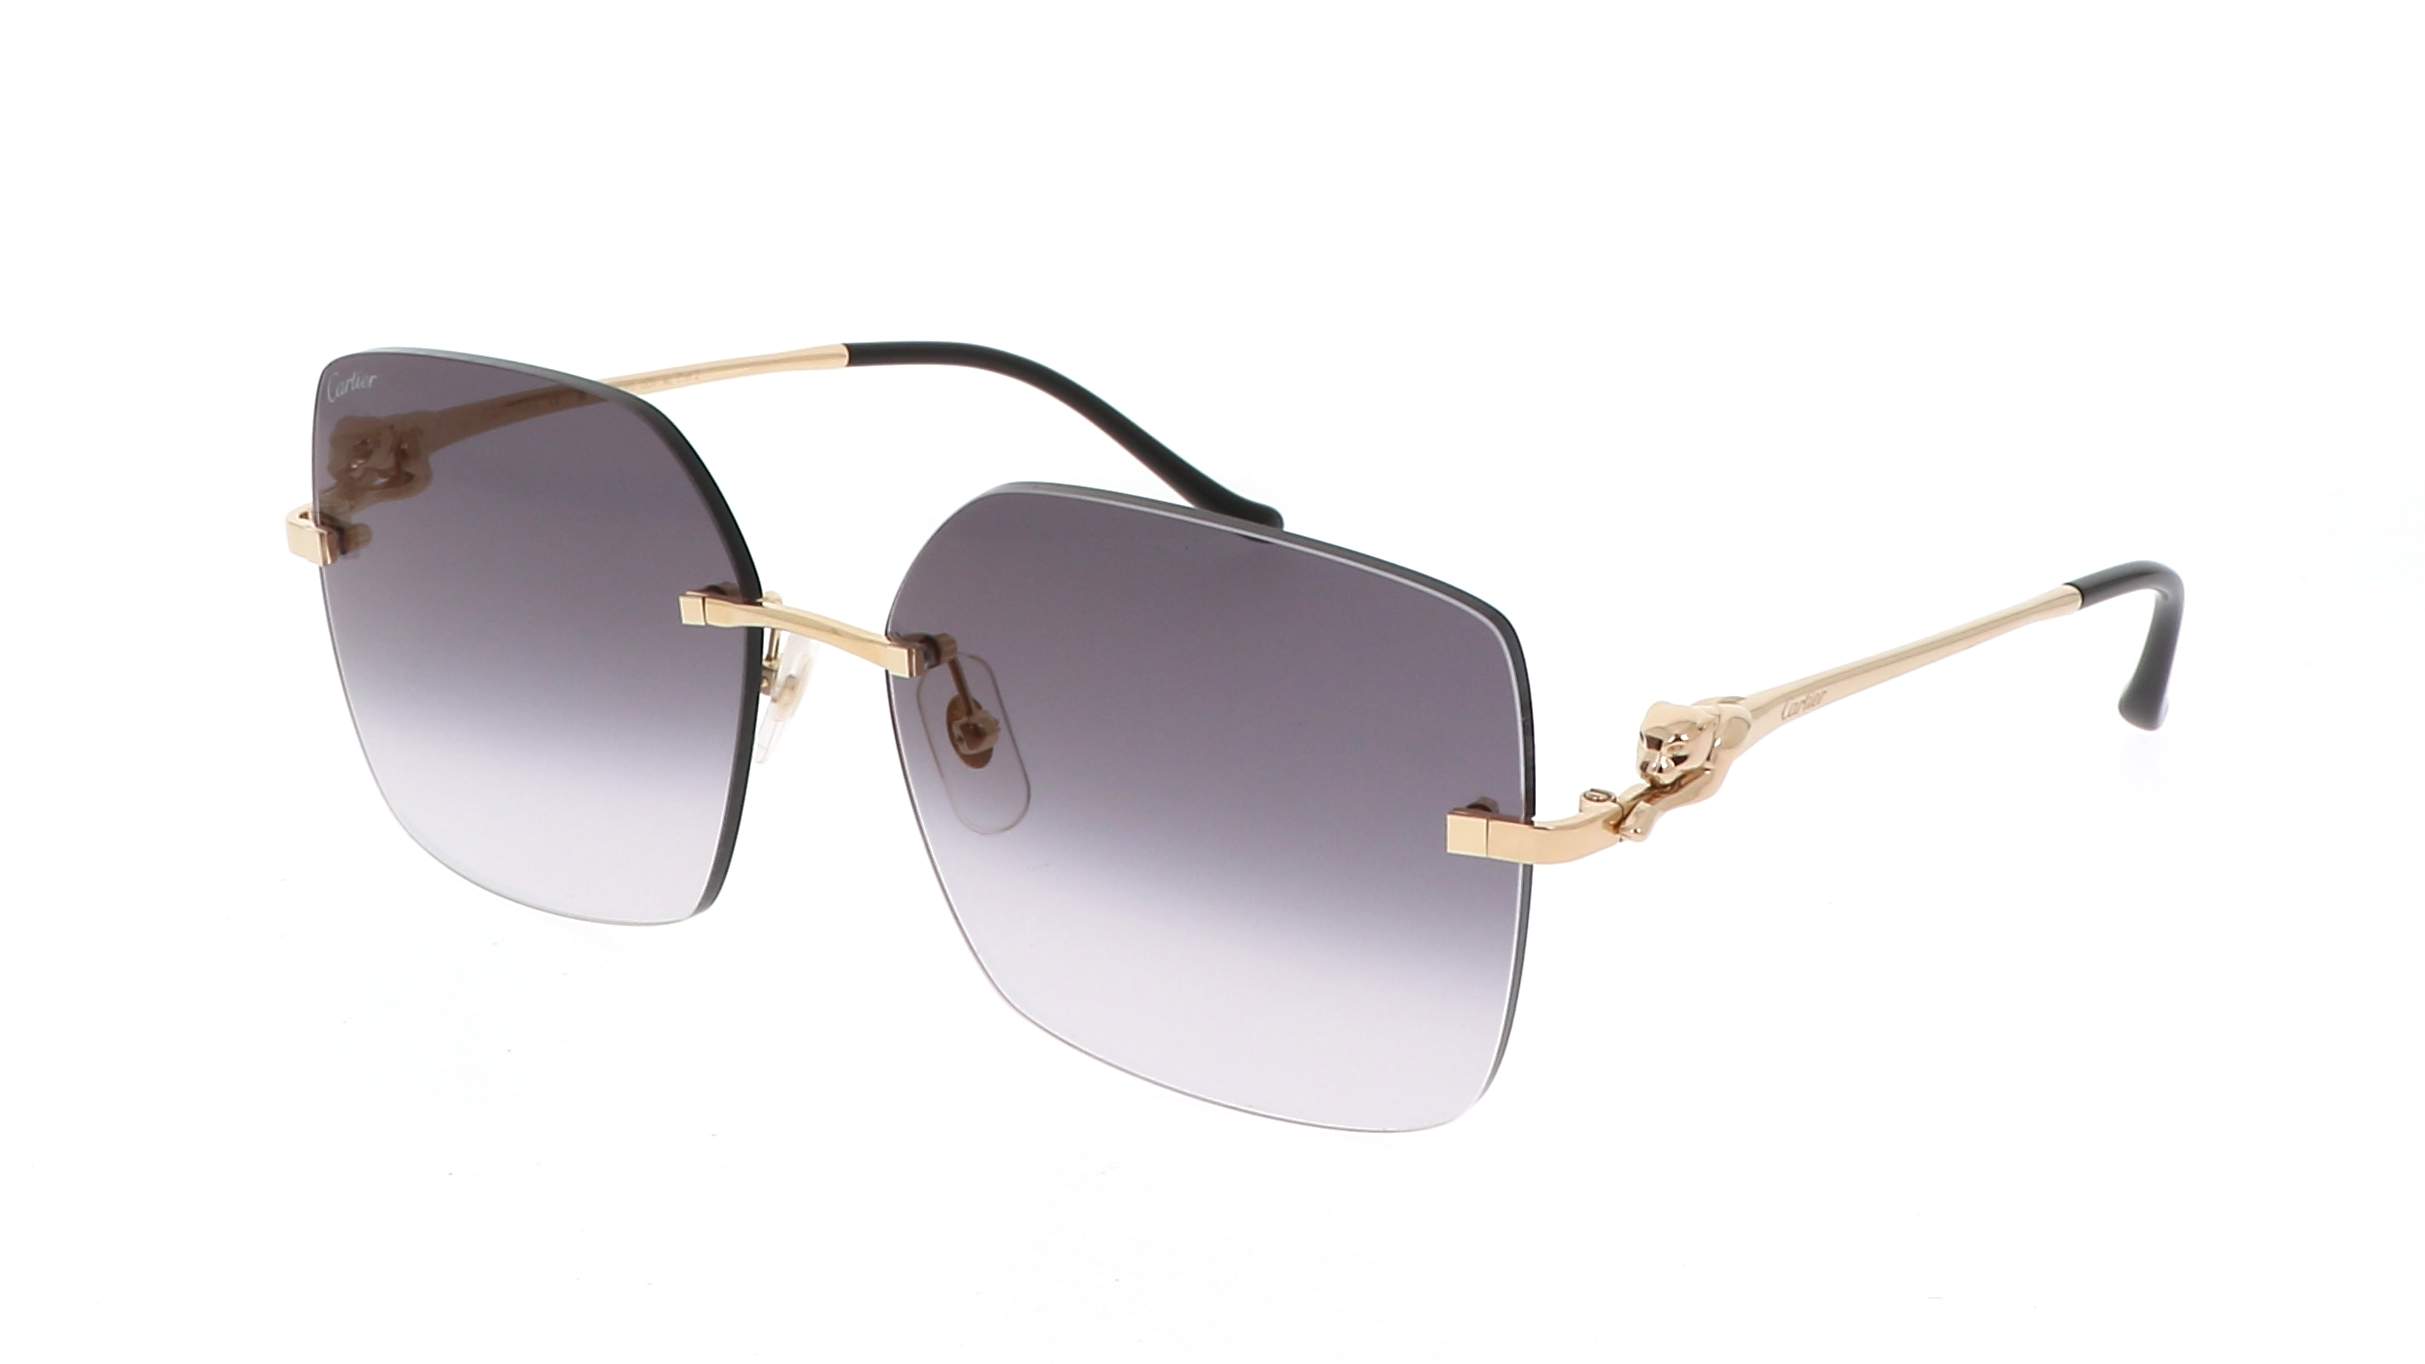 Sunglasses Cartier CT0359S 001 60-15 Gold in stock | Price 658,33 ...